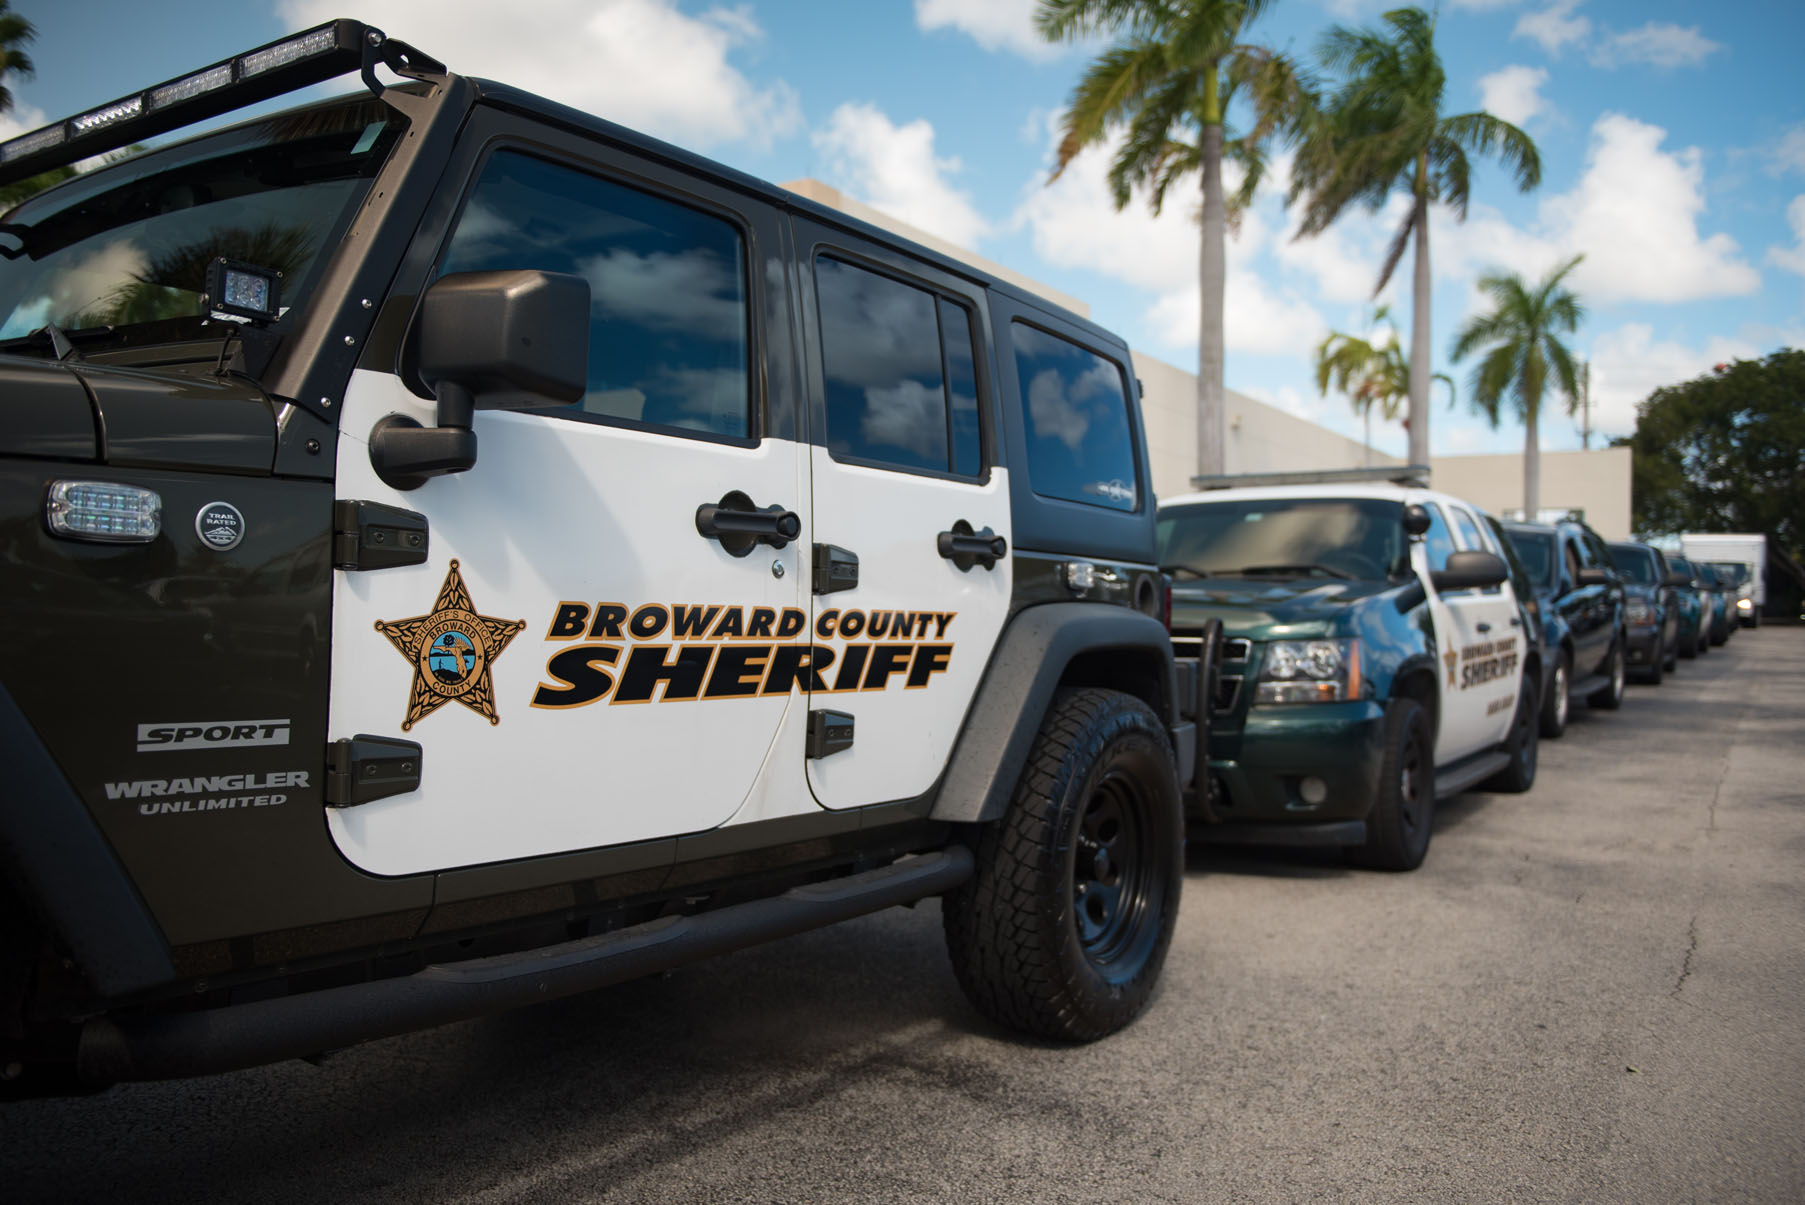 Sheriff Israel: Assisting Others in Times of Need